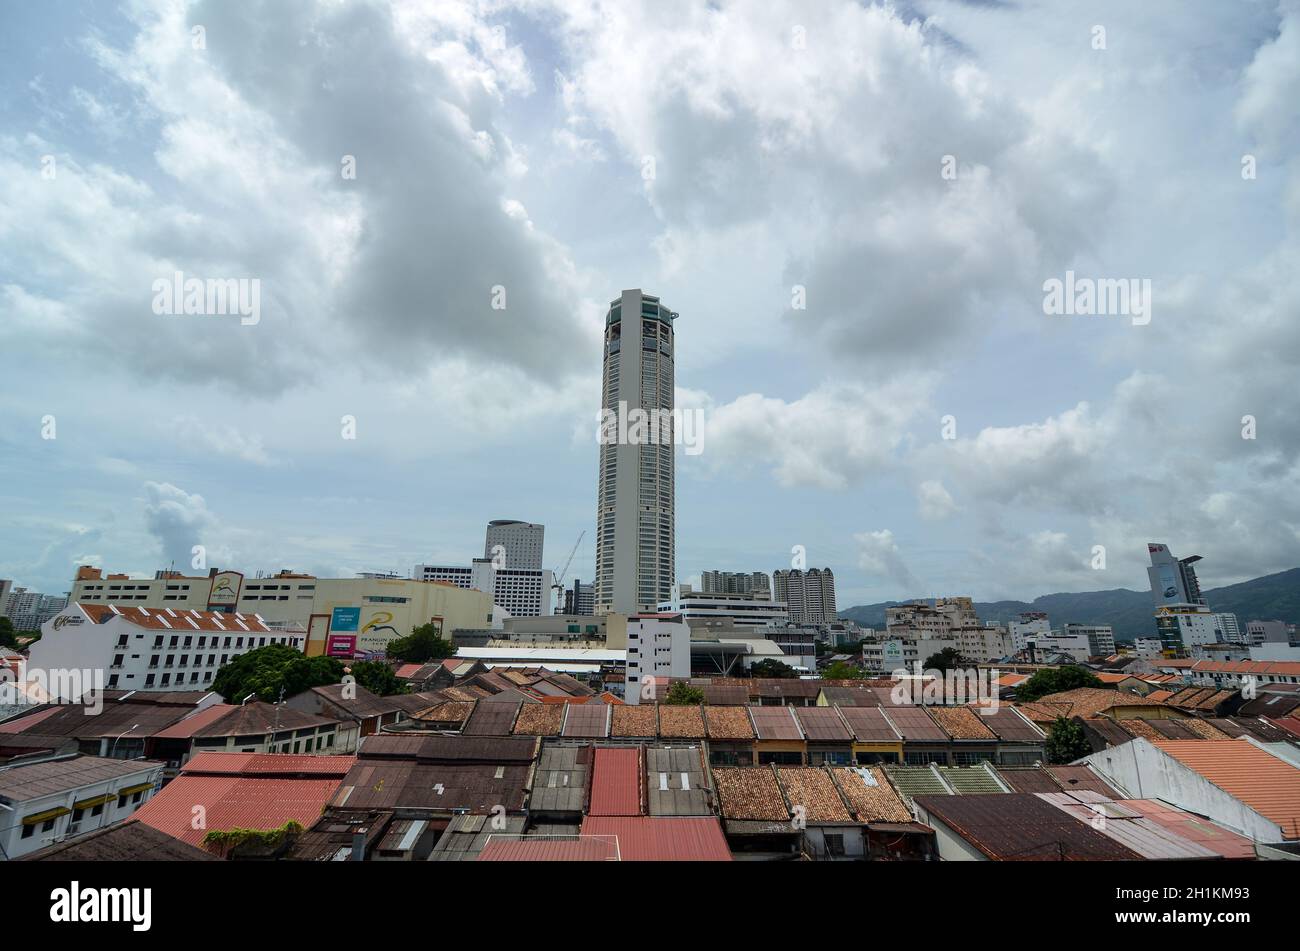 Georgetown, Penang/Malaysia - Oct 23 2016: Highest tower KOMTAR building and the surrounding heritage house at Penang Island. Stock Photo